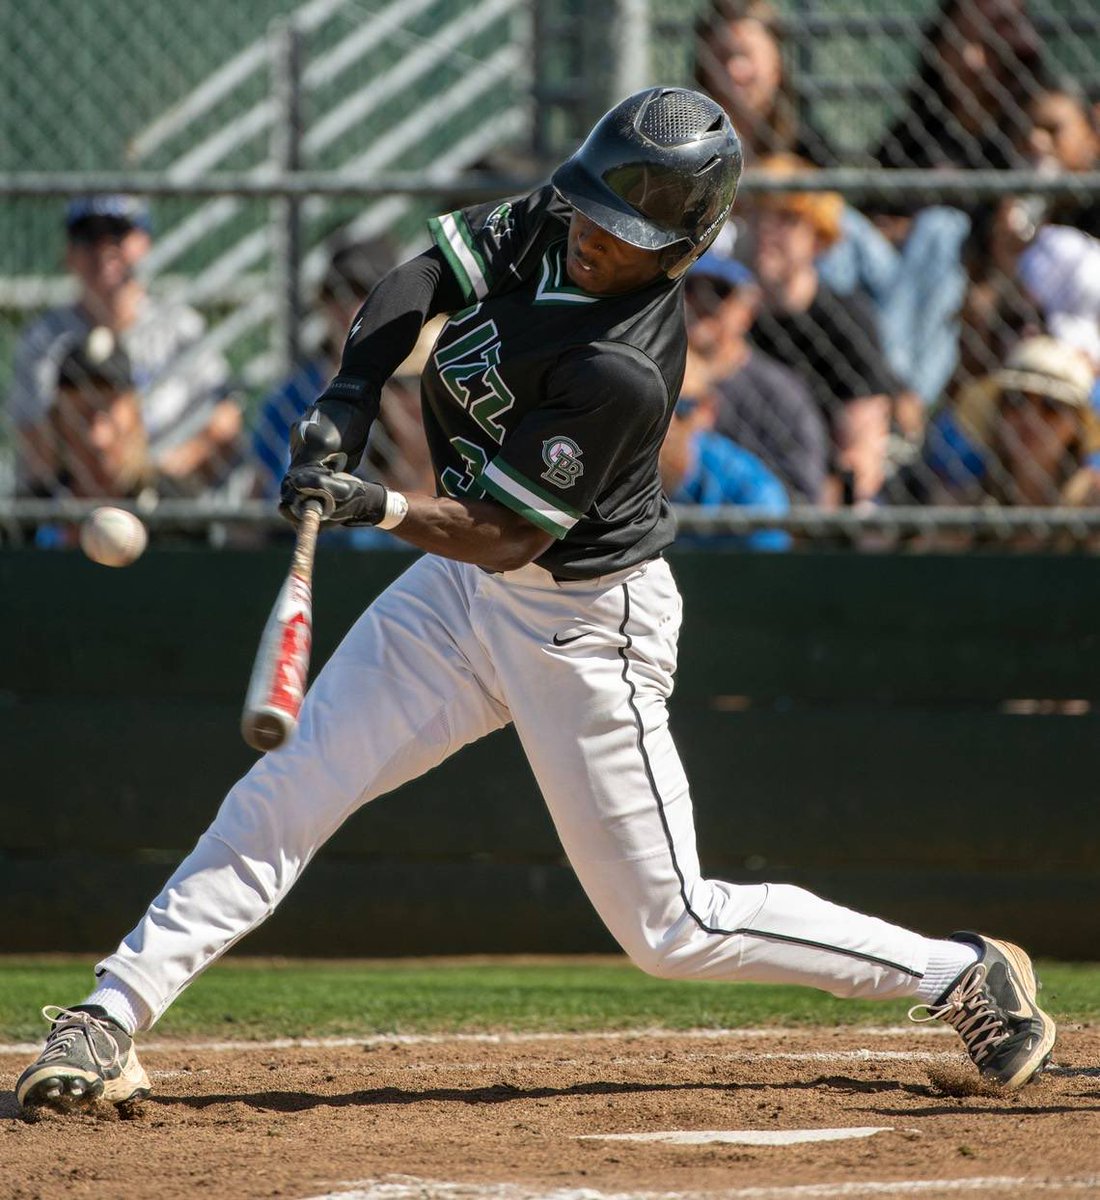 The Bee’s 2024 baseball playoff preview: Sizing up championship favorites and contenders ⁦@ABCJAMPro⁩ ⁦@PremierPrepsNMP⁩ sacbee.com/sports/high-sc…